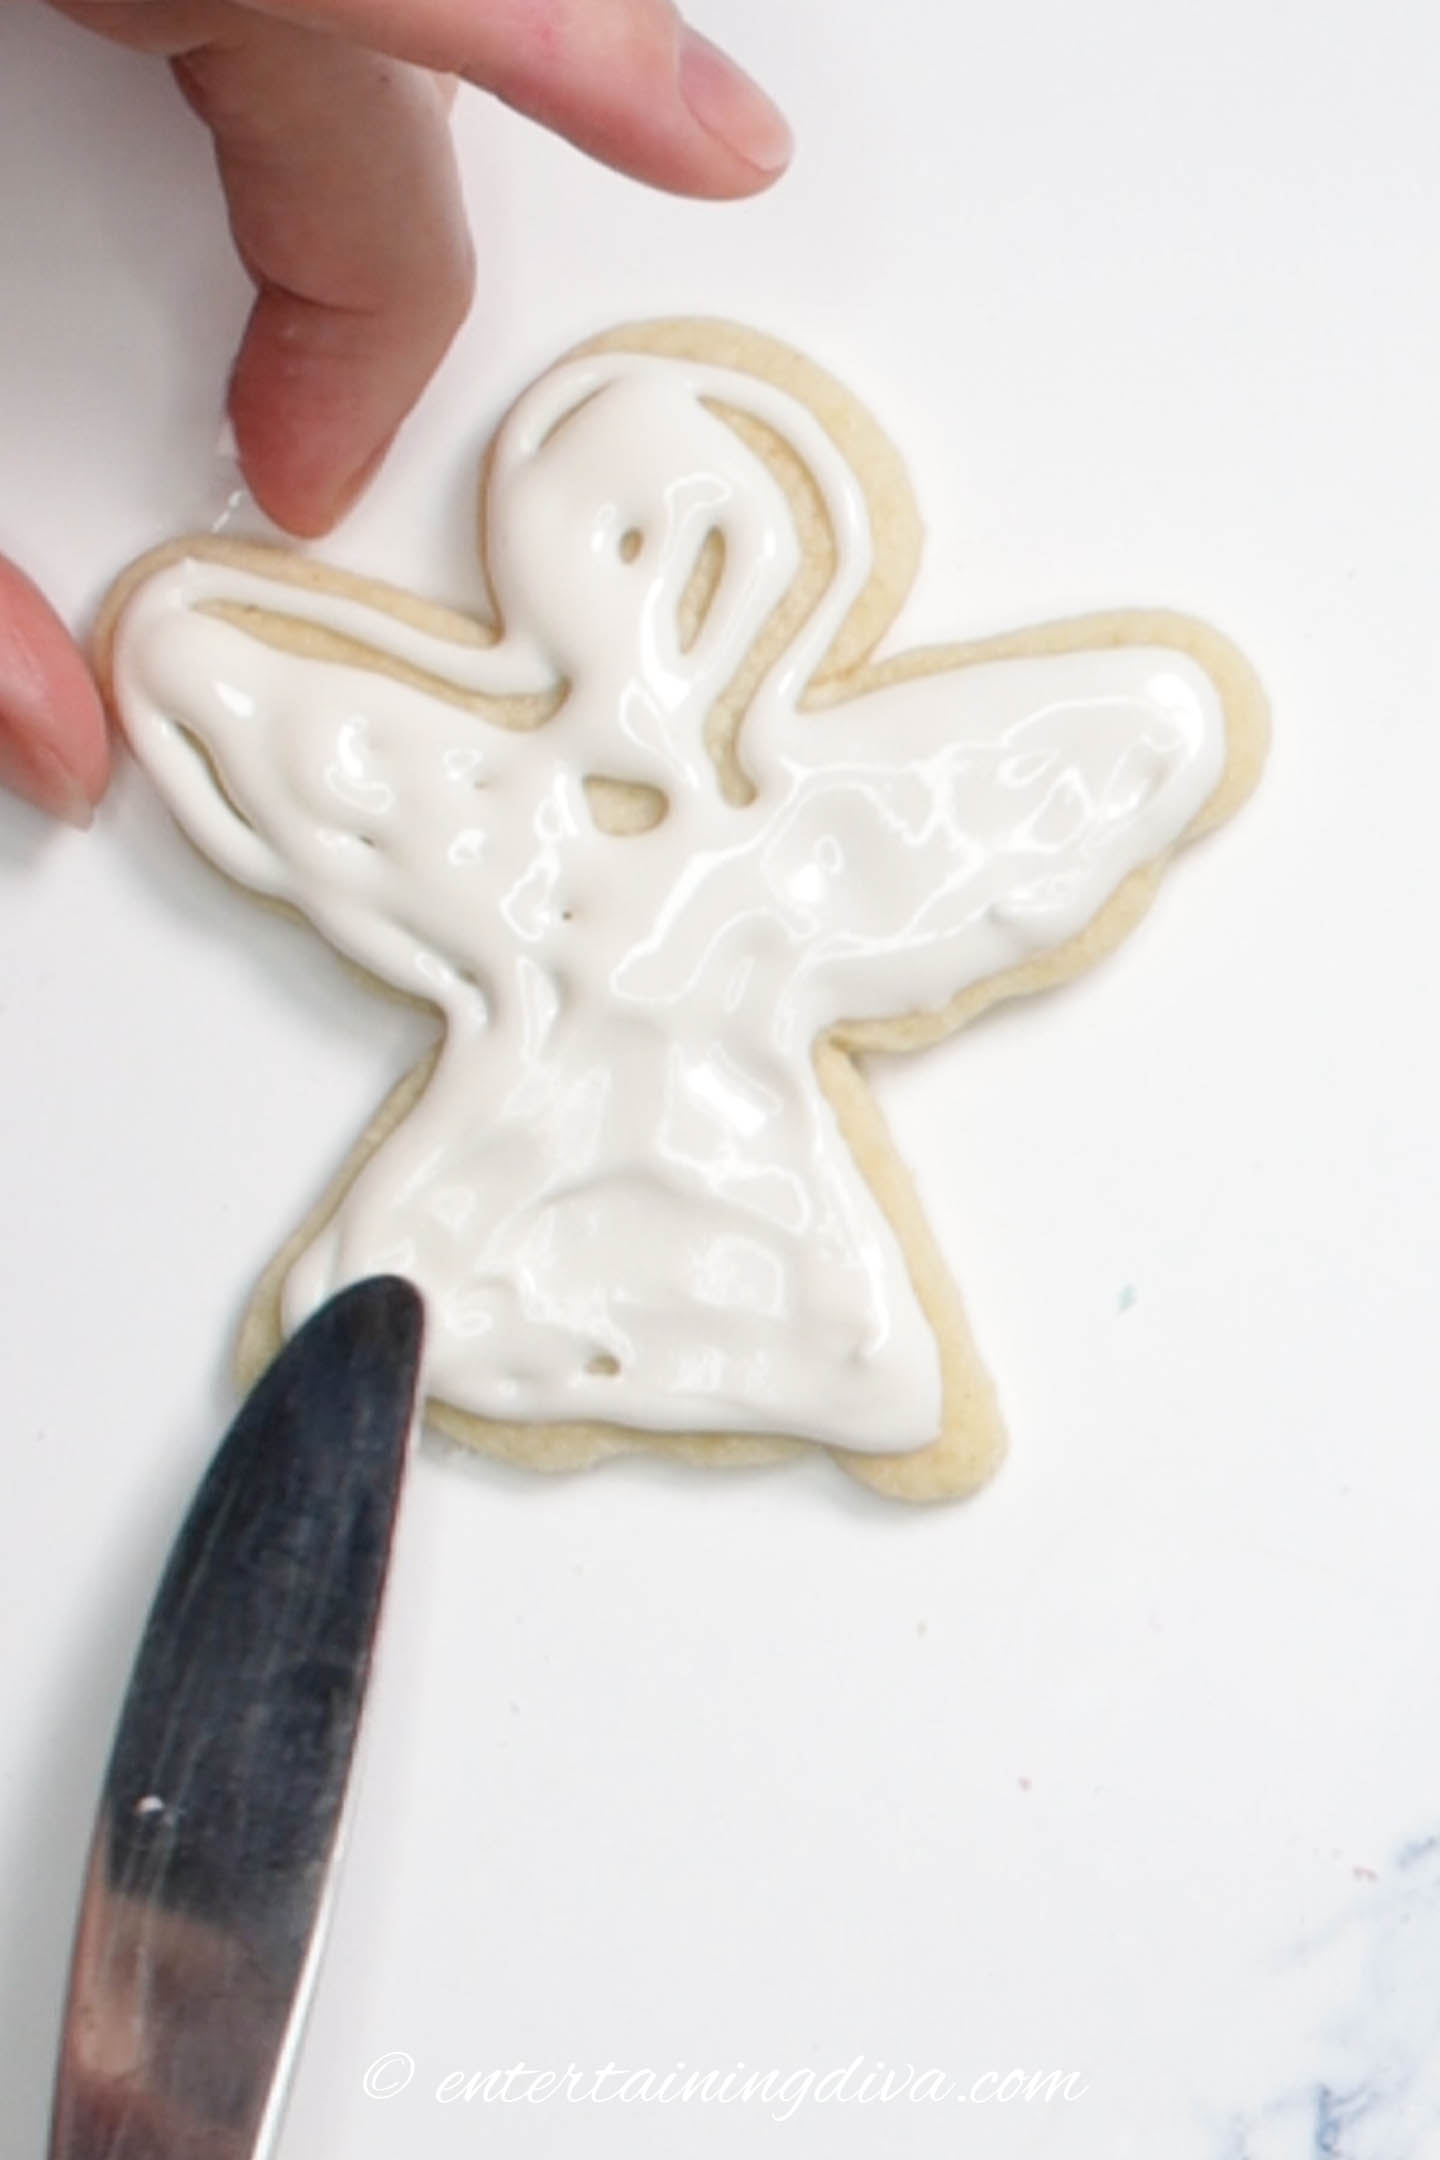 Icing being spread out on the cookie with a knife